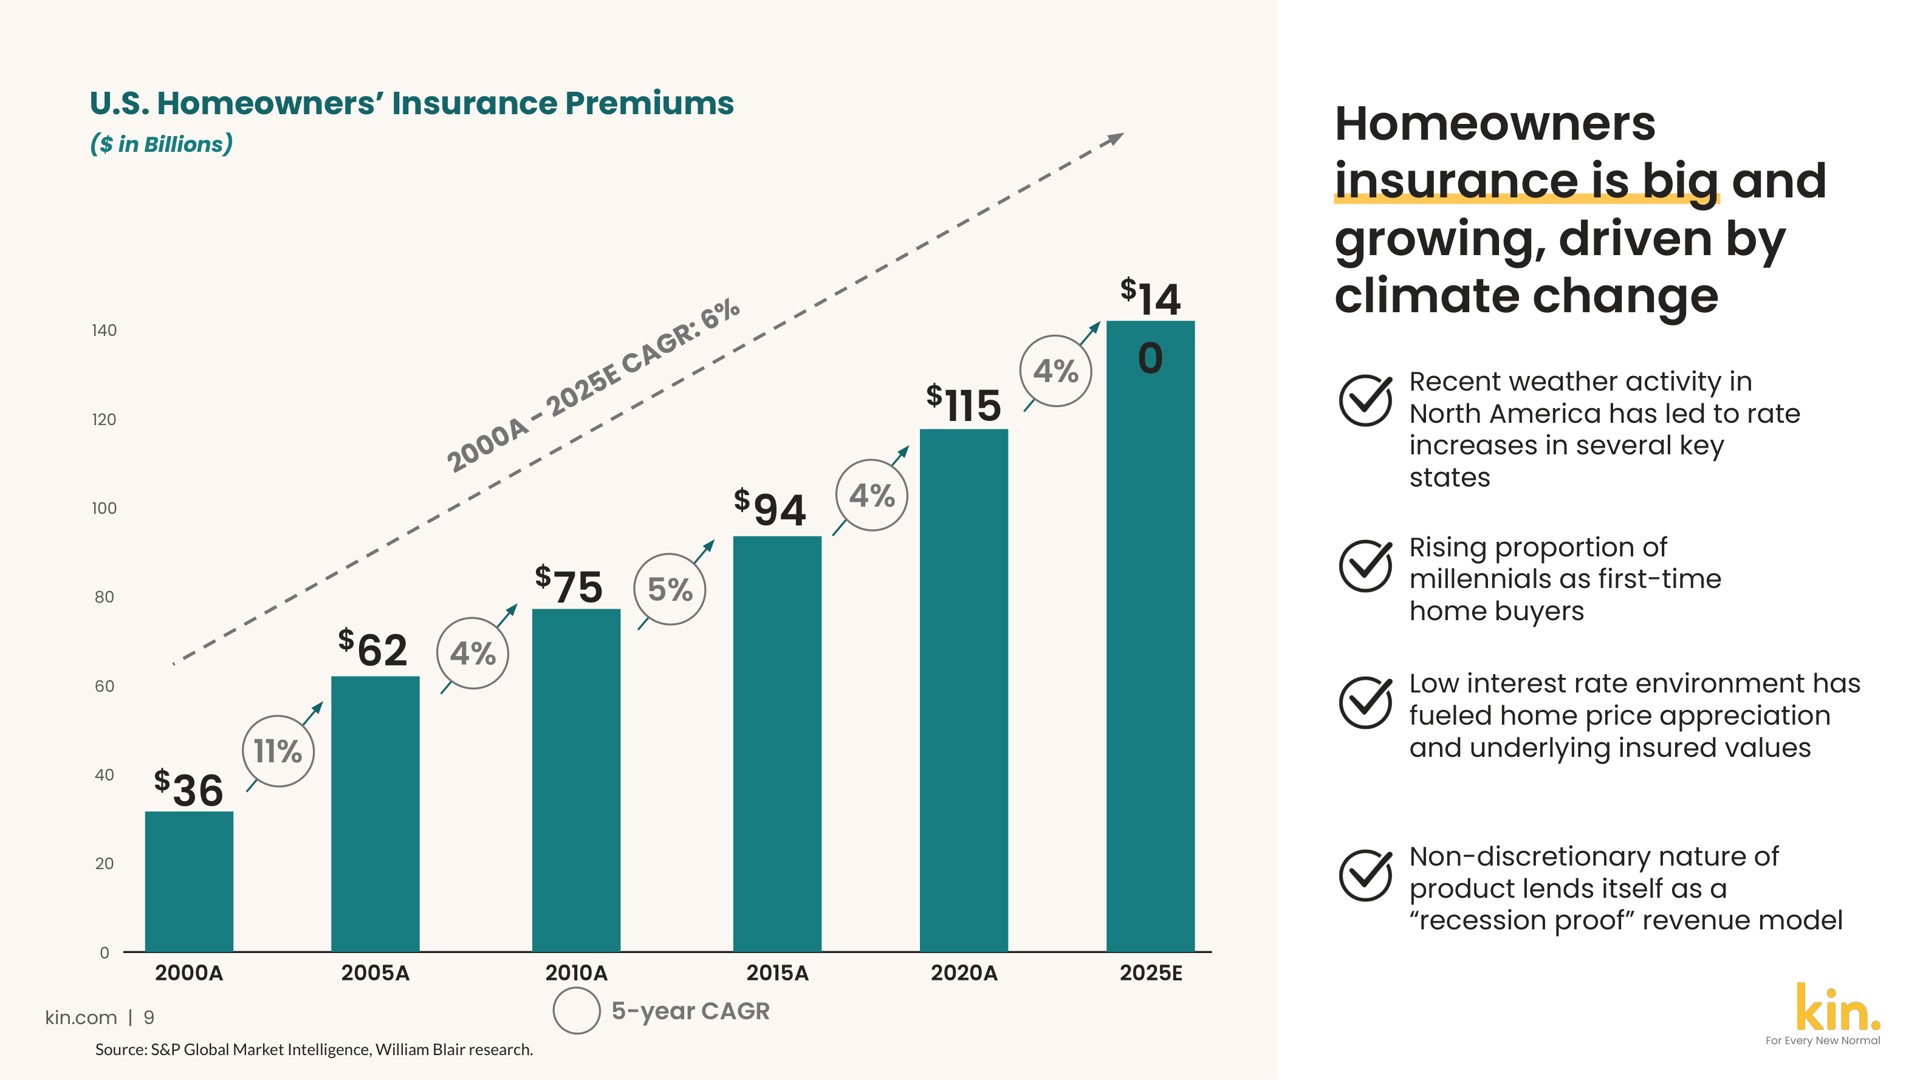 homeowners insurance is big and growing driven by climate change | Kin